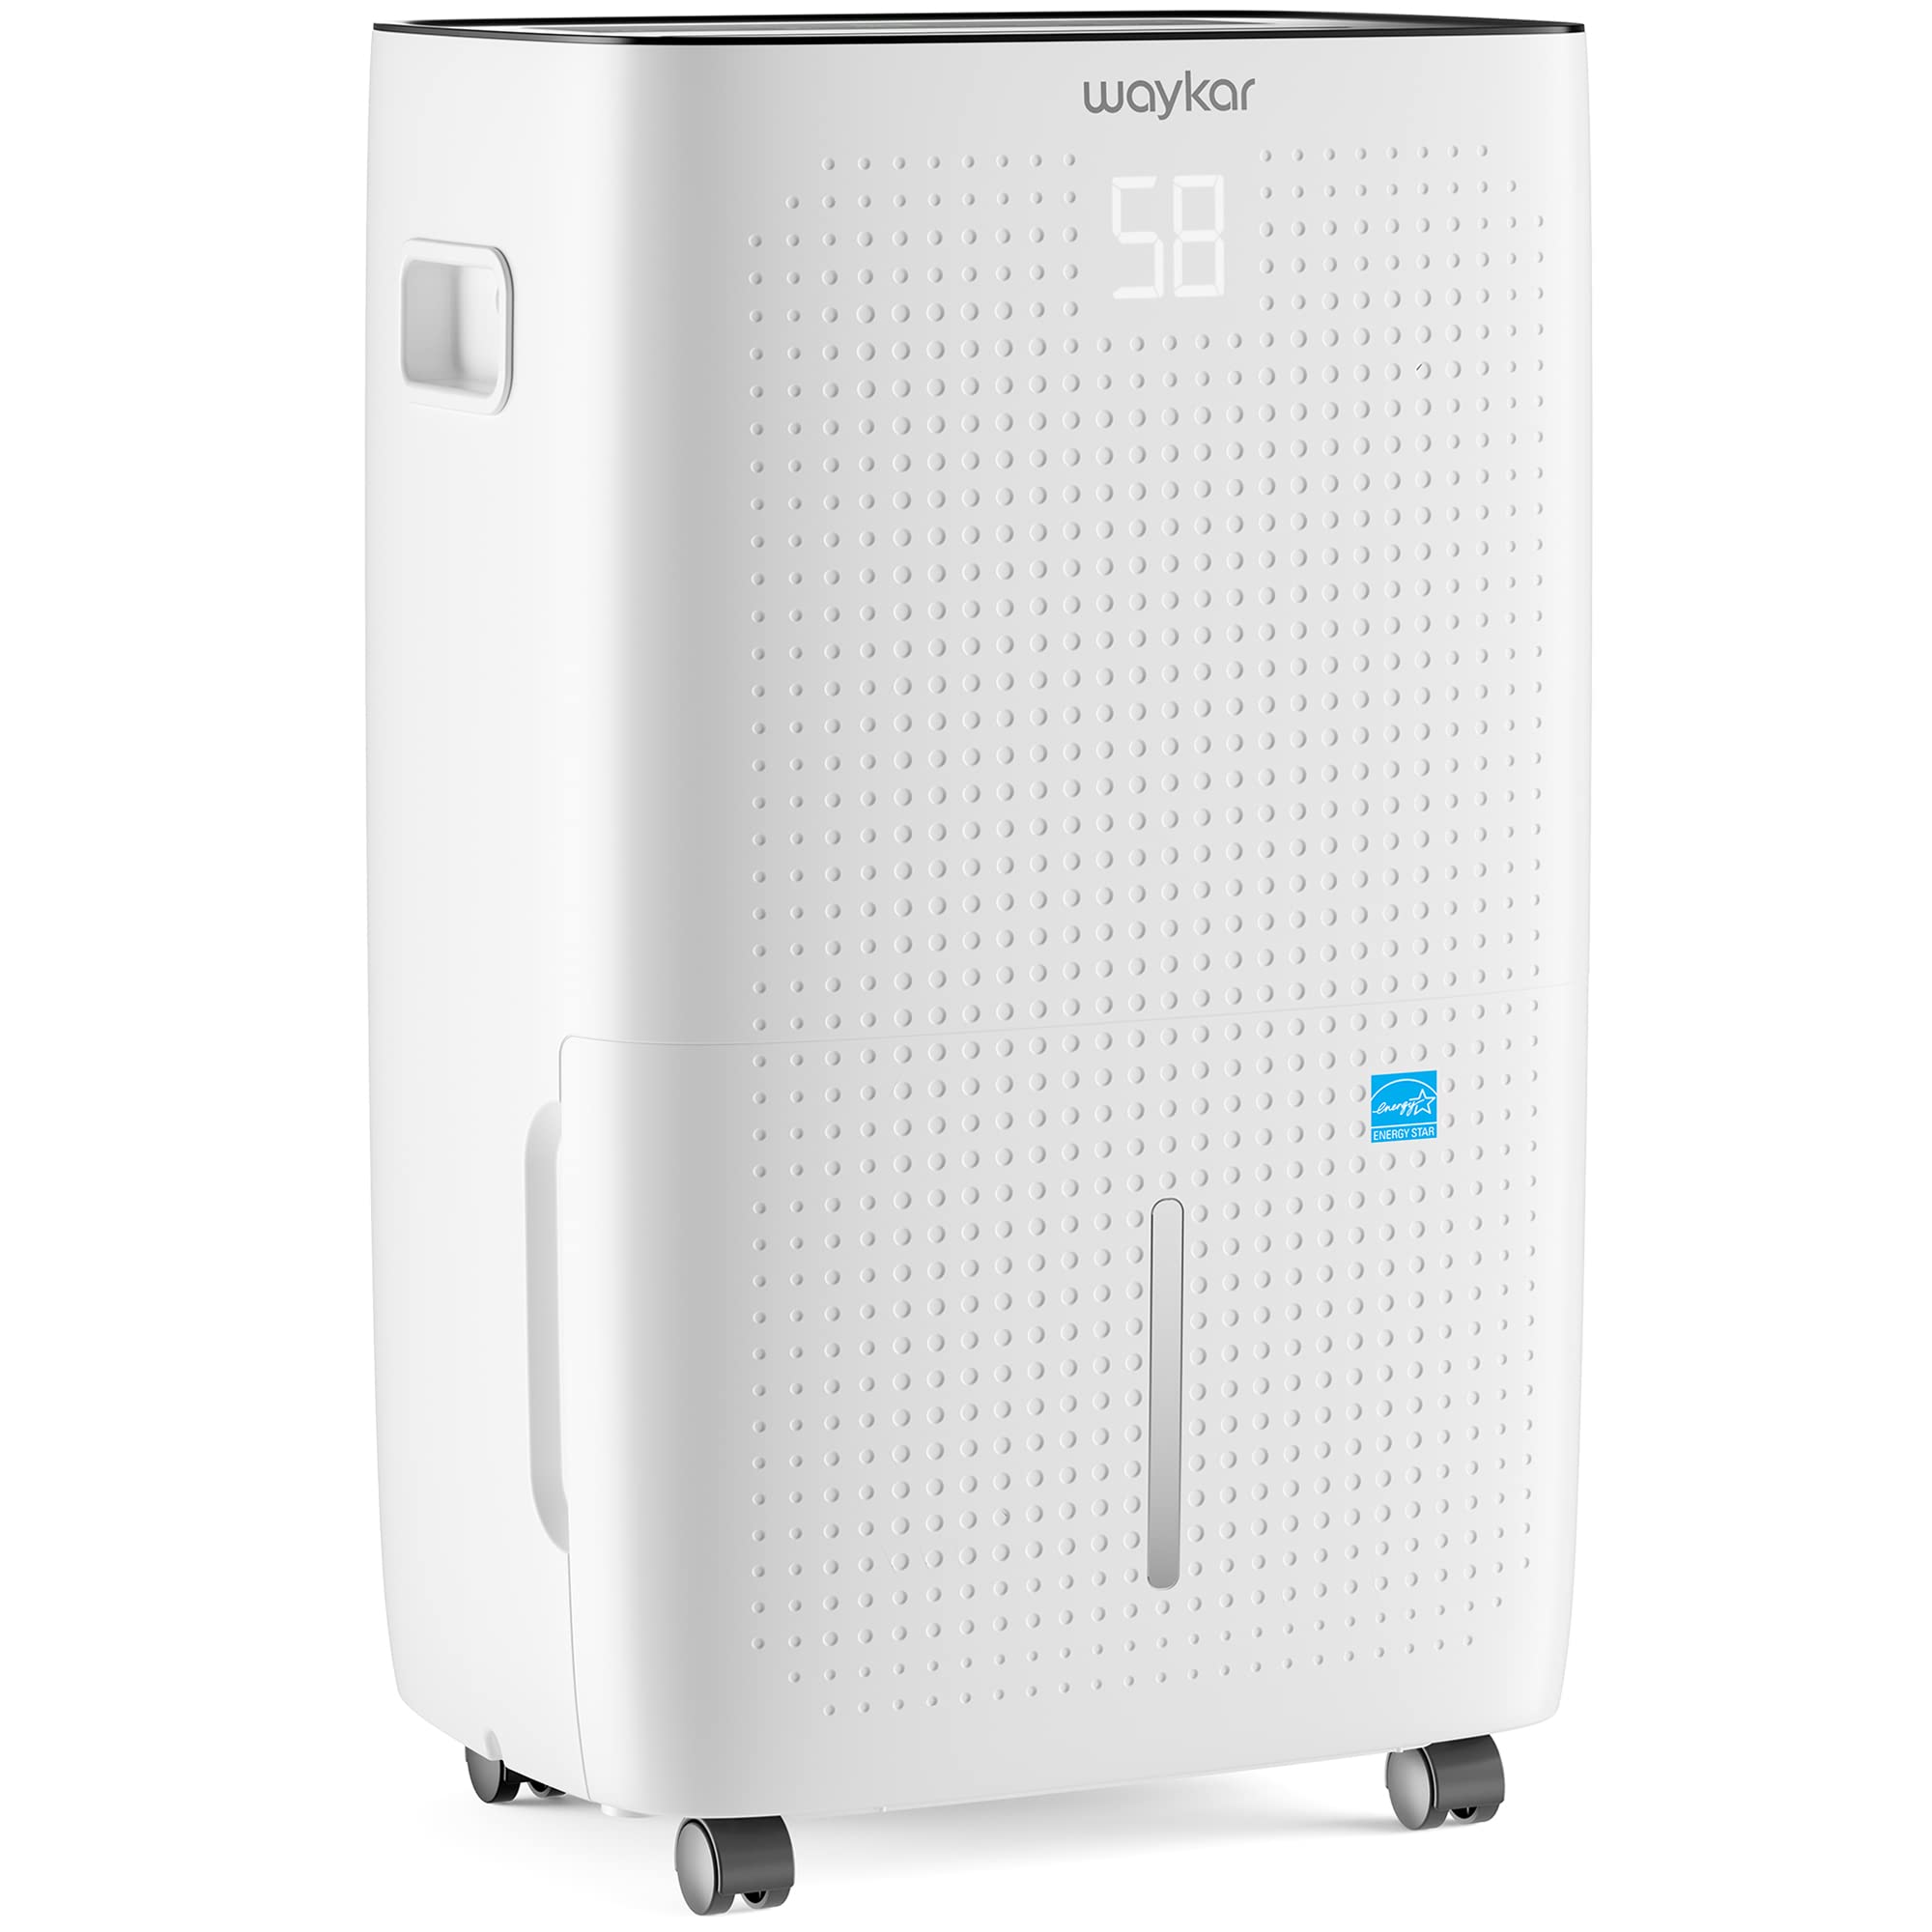 Waykar 150 Pints 7,000 Sq. Ft Energy Star Dehumidifier with Drain Hose for Commercial and Industrial Large Rooms, Warehouses, Storages, Home, Basements and Bedroom with 2.04 Gal Water Tank